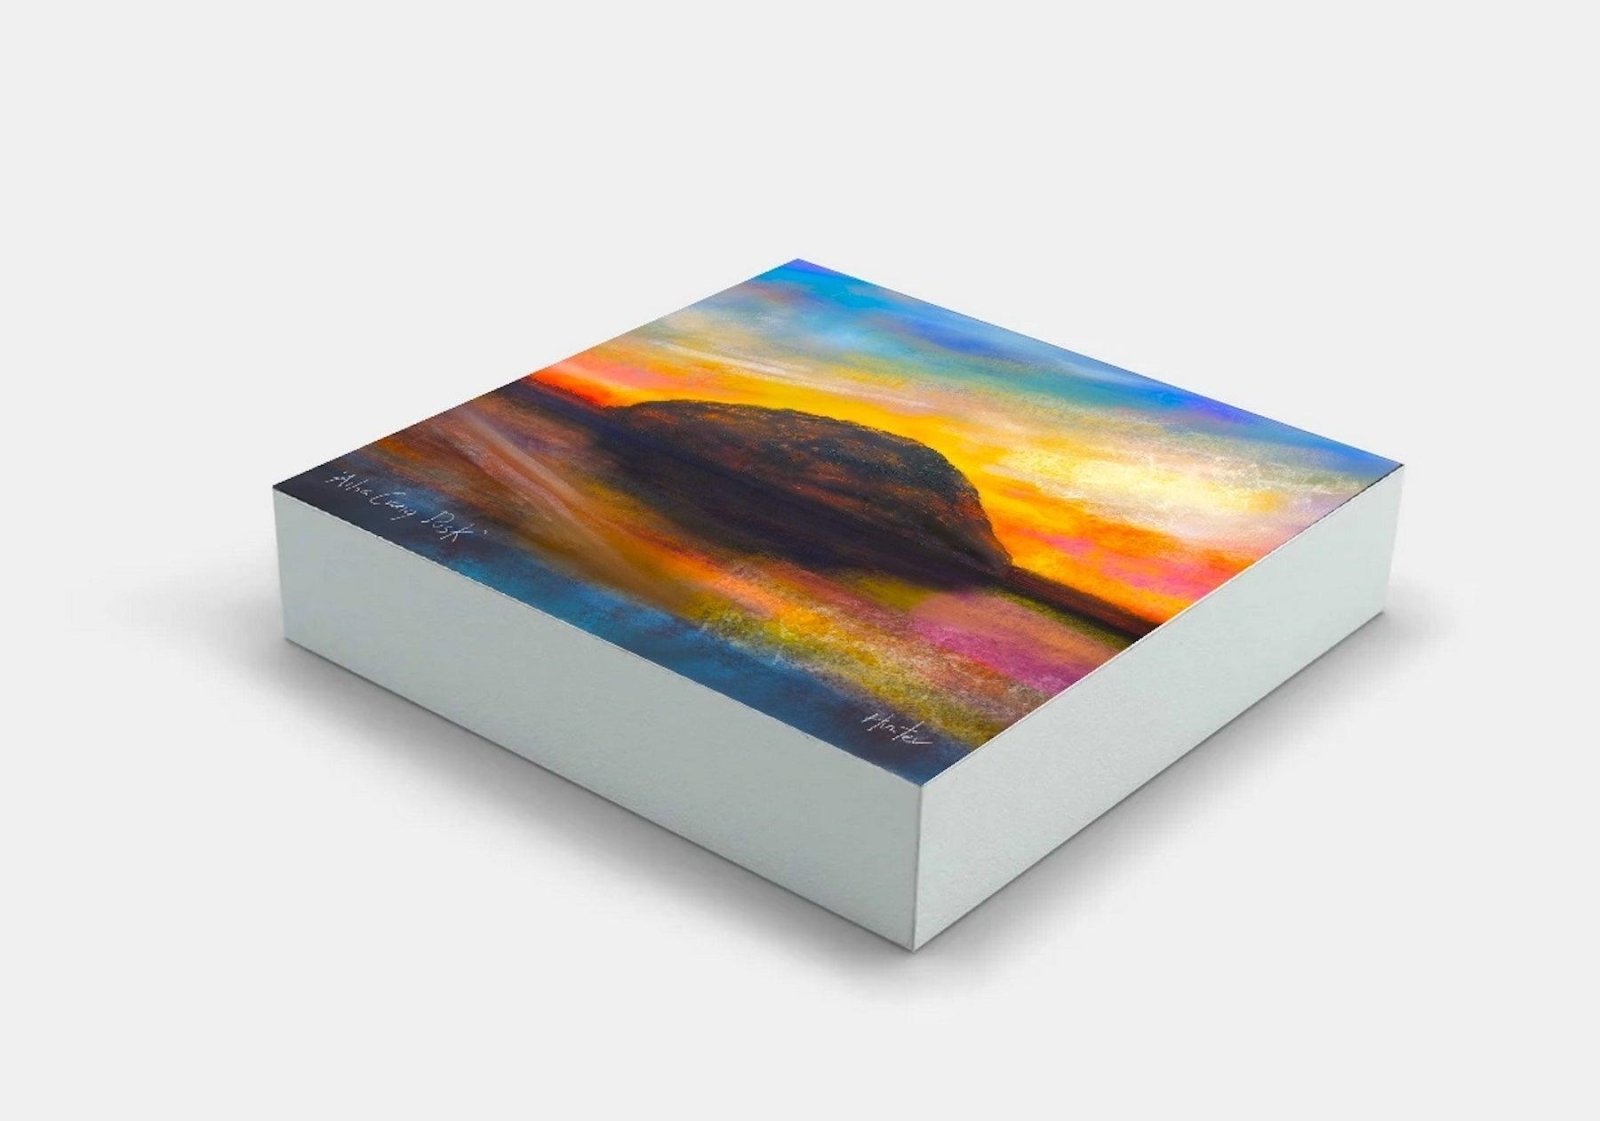 An Ethereal Ring Of Brodgar Orkney Wooden Art Block-Wooden Art Blocks-Orkney Art Gallery-Paintings, Prints, Homeware, Art Gifts From Scotland By Scottish Artist Kevin Hunter